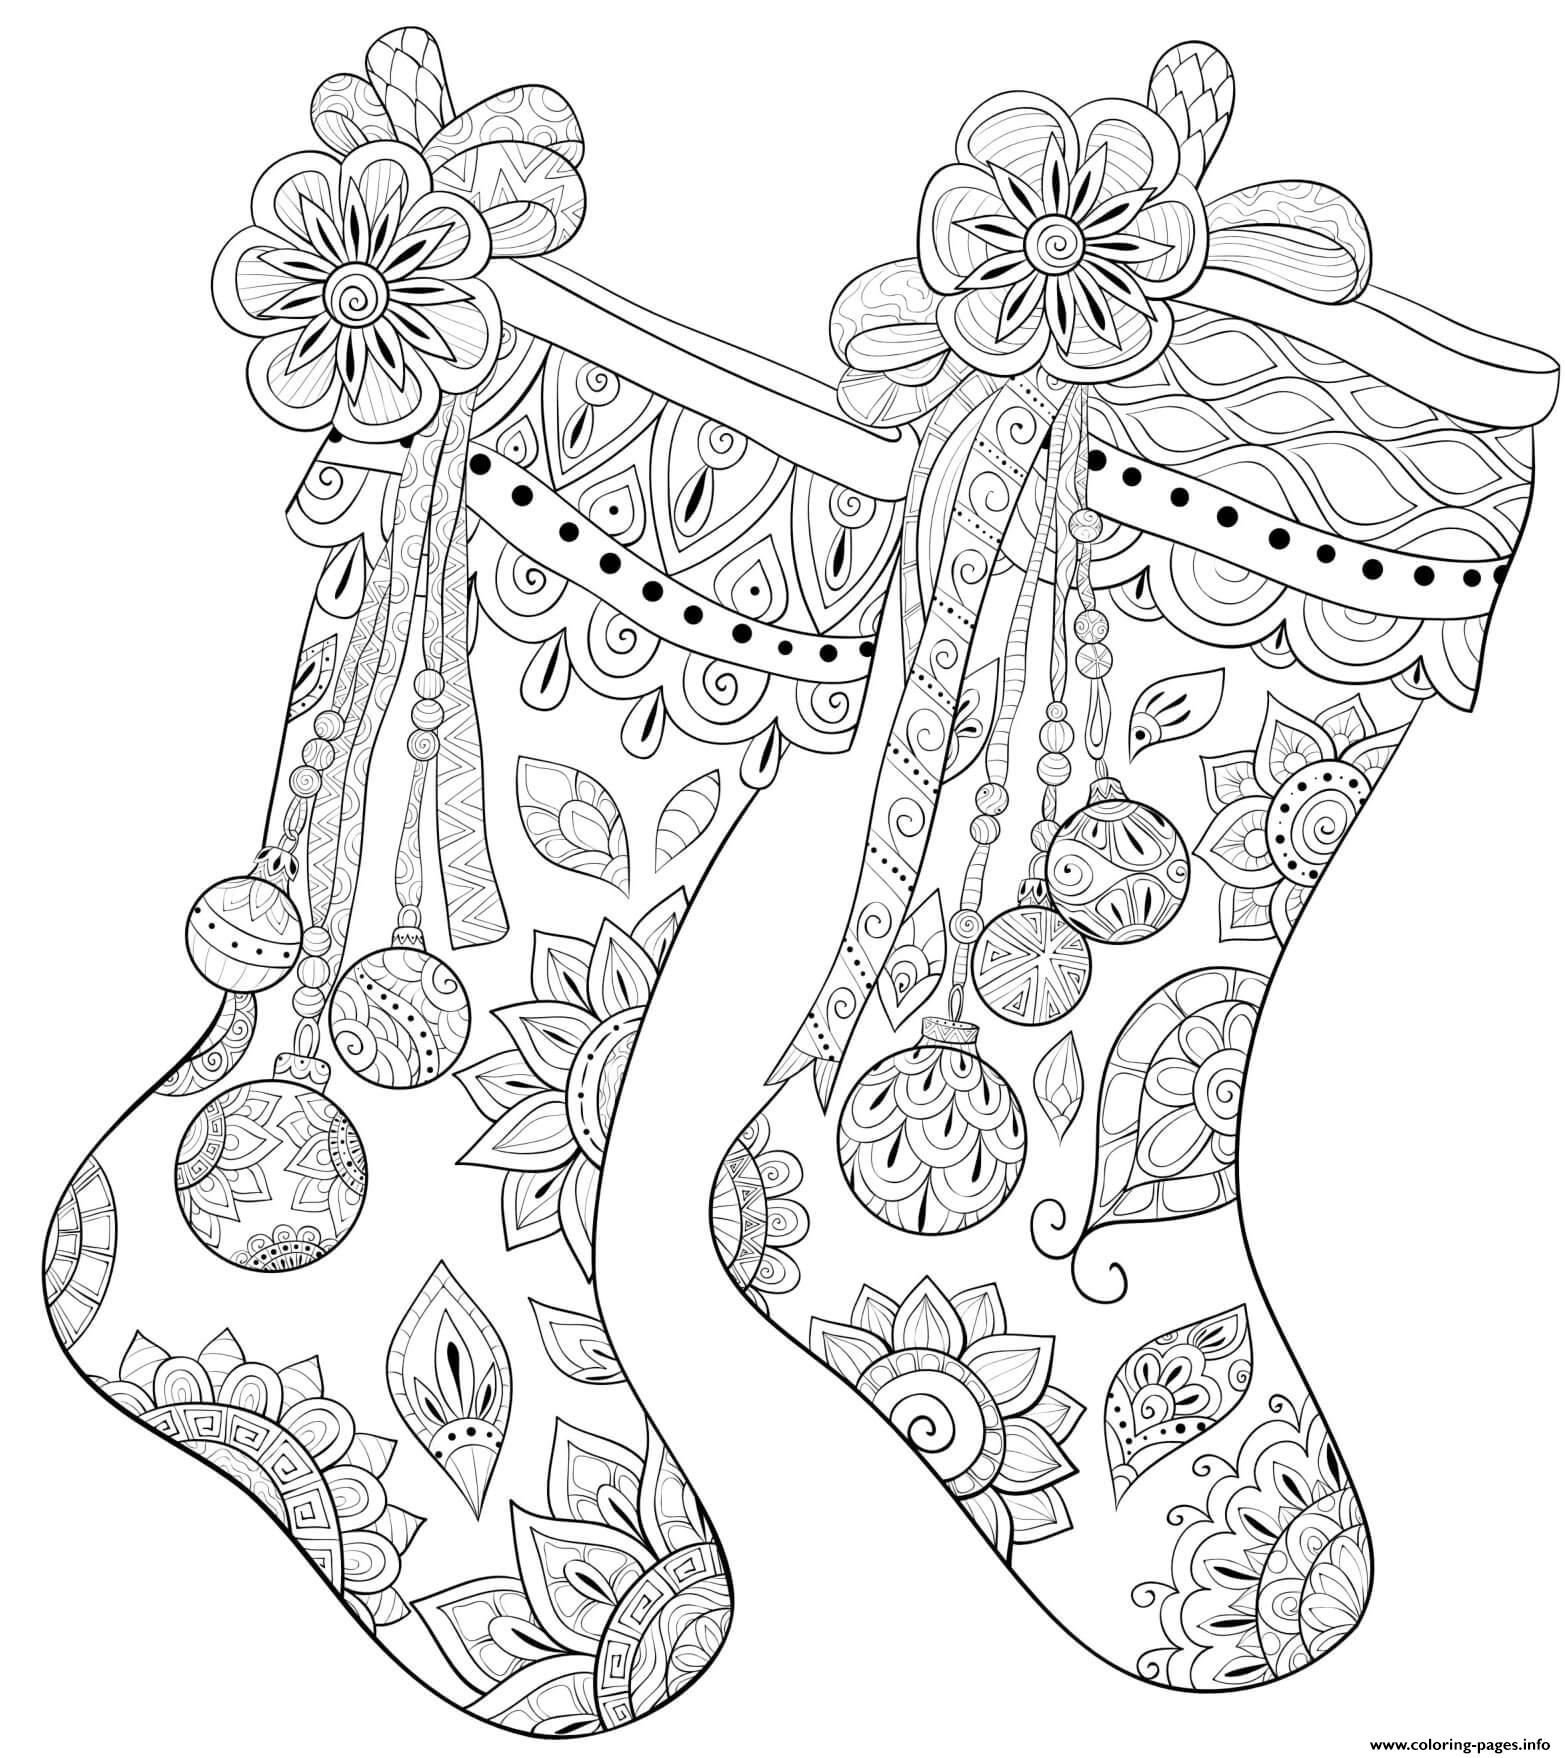 Christmas For Adults Patterned Stockings Coloring page Printable